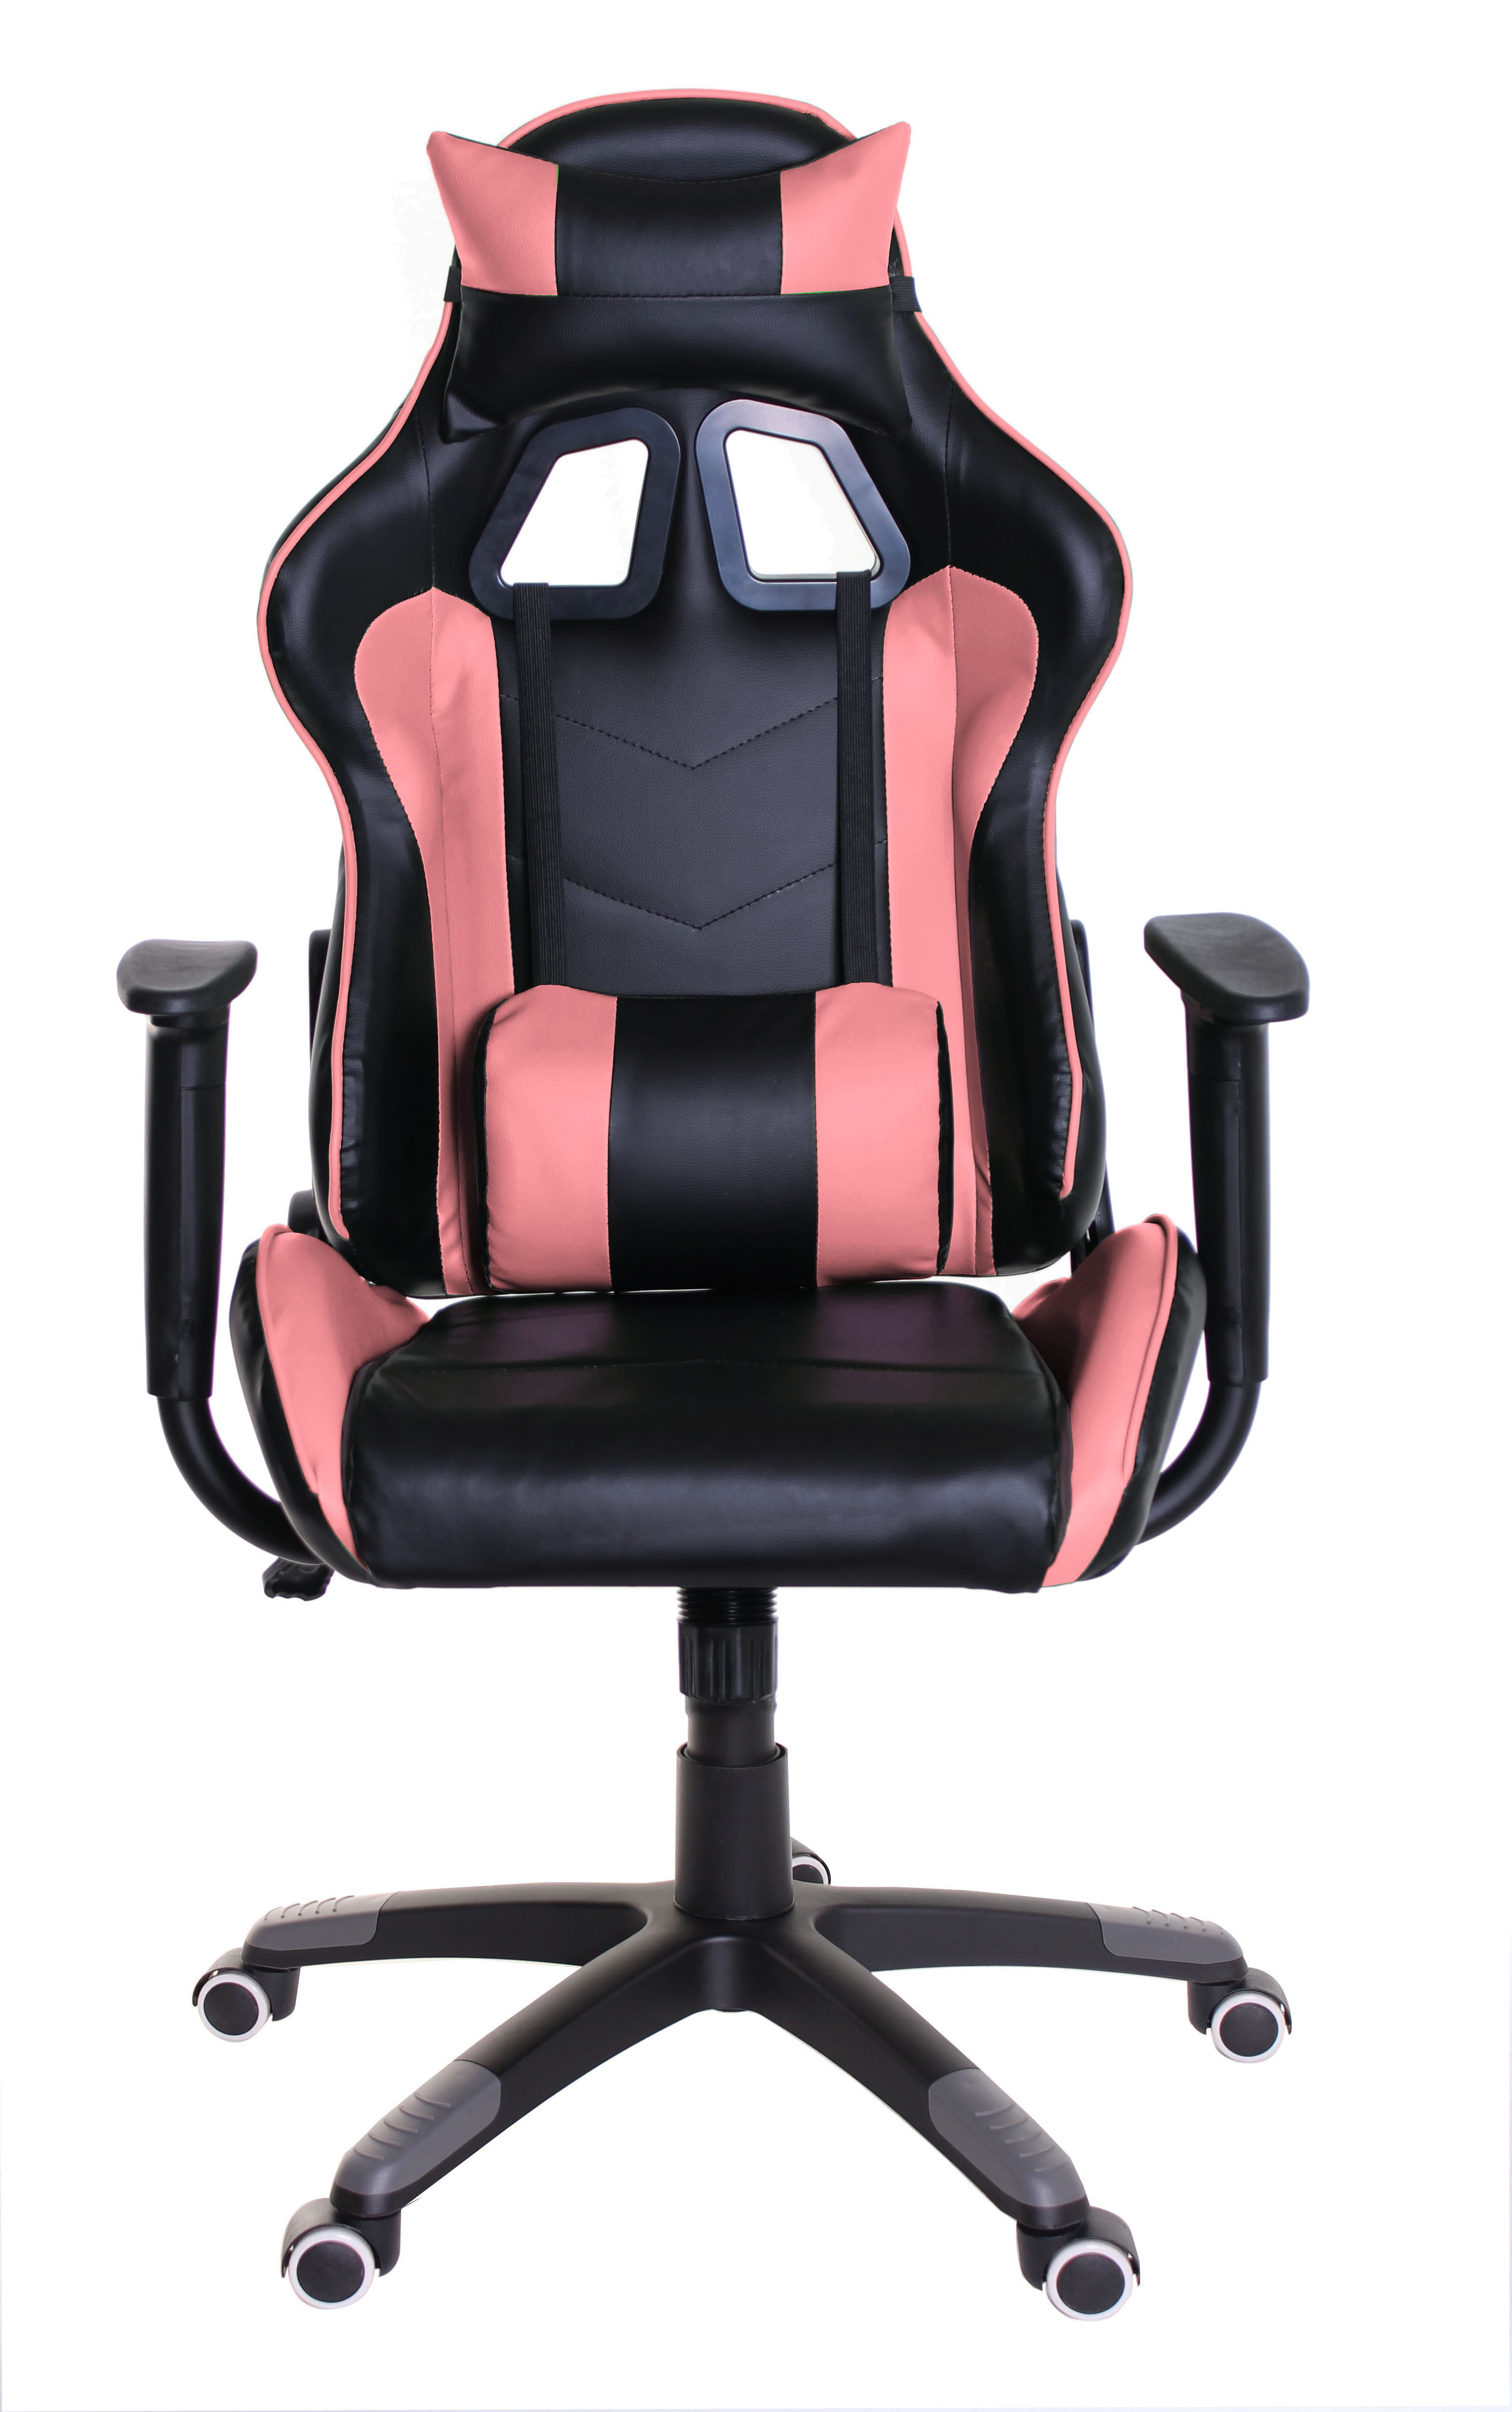 TimeOffice Ergonomic Gaming Chair Race Car Style with PU ...